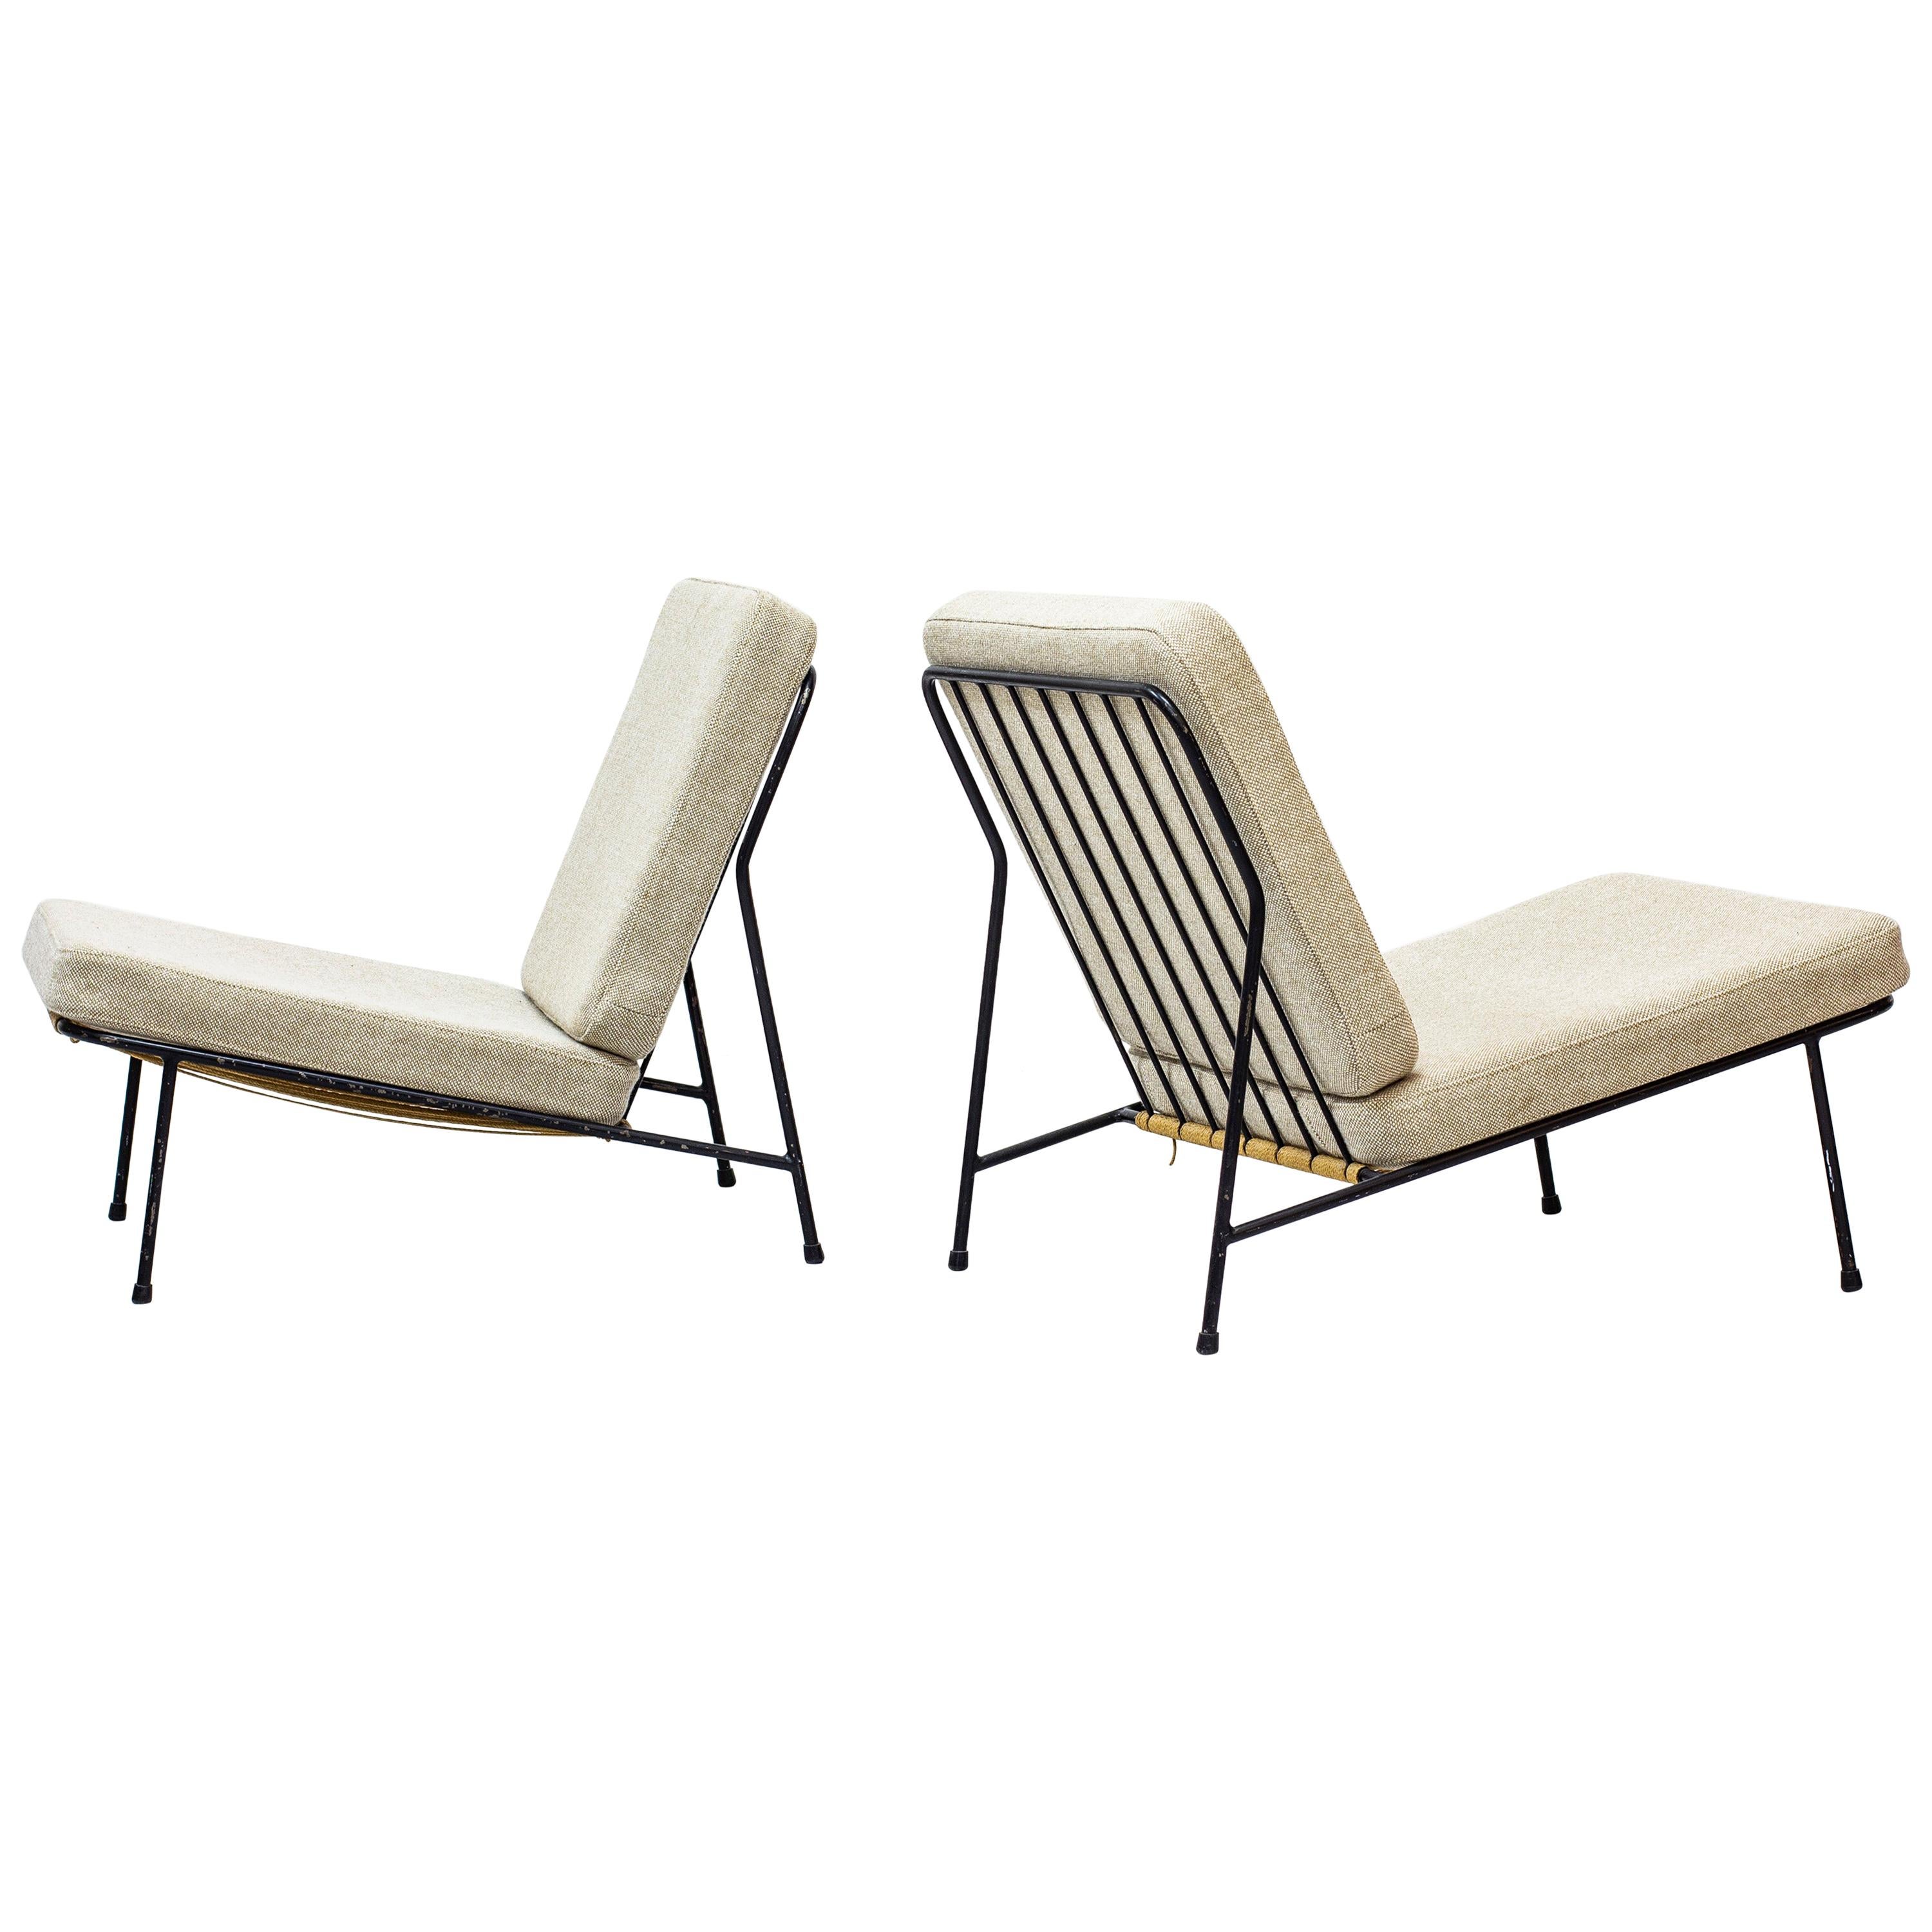 Lounge Chairs by Alf Svensson for Ljungs Industrier, Sweden, Midcentury, 1950s For Sale